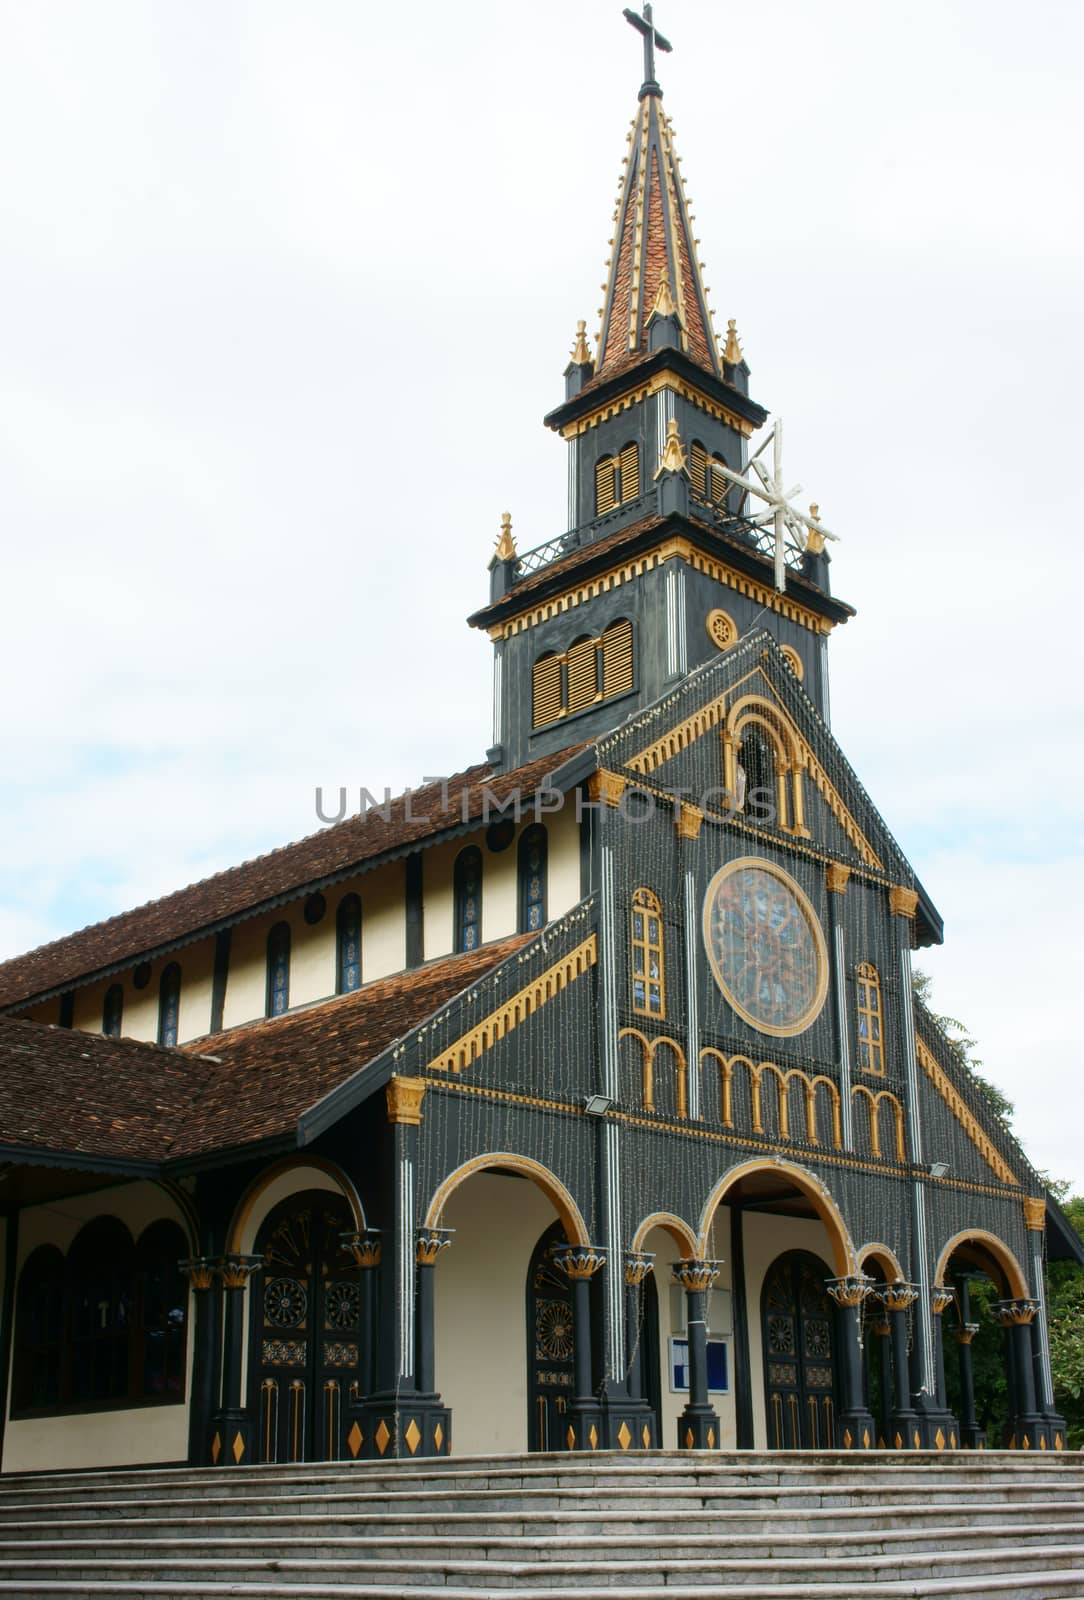 KON TUM, VIET NAM- AUG 22: Kontum wooden church, 100 years old, an ancient cathedral, religion heritage, famous place for travel, amazing architect make wonderful landscape, Vietnam, Aug 22, 2015